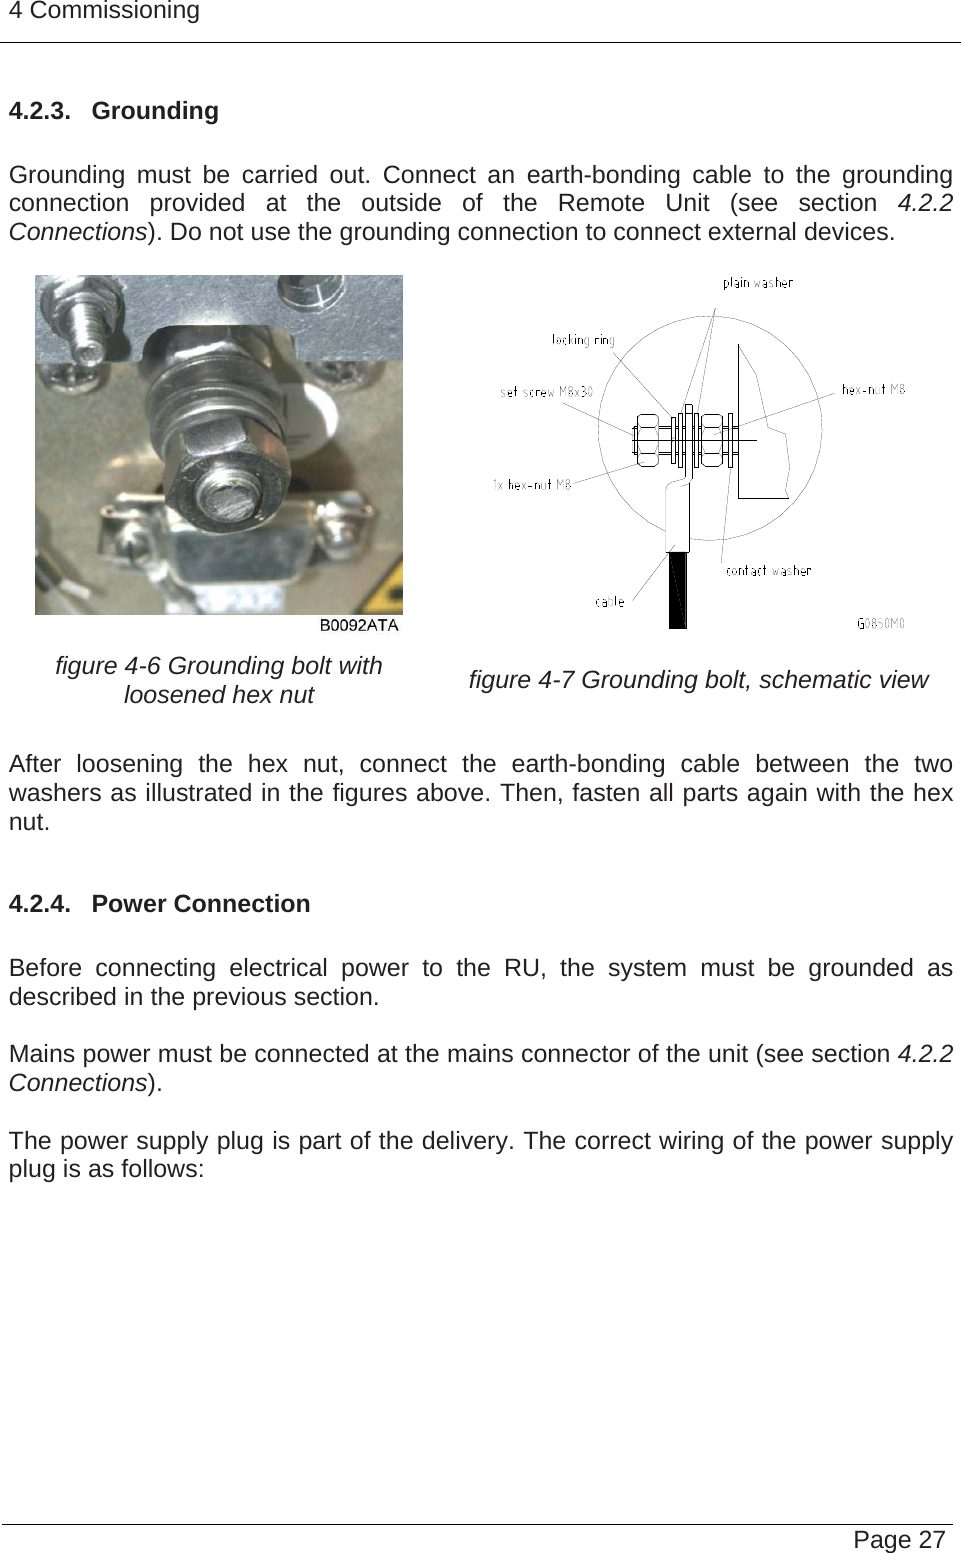 4 Commissioning   Page 274.2.3.  Grounding  Grounding must be carried out. Connect an earth-bonding cable to the grounding connection provided at the outside of the Remote Unit (see section 4.2.2 Connections). Do not use the grounding connection to connect external devices.    figure 4-6 Grounding bolt with loosened hex nut  figure 4-7 Grounding bolt, schematic view  After loosening the hex nut, connect the earth-bonding cable between the two washers as illustrated in the figures above. Then, fasten all parts again with the hex nut.  4.2.4.  Power Connection  Before connecting electrical power to the RU, the system must be grounded as described in the previous section.  Mains power must be connected at the mains connector of the unit (see section 4.2.2 Connections).  The power supply plug is part of the delivery. The correct wiring of the power supply plug is as follows:  